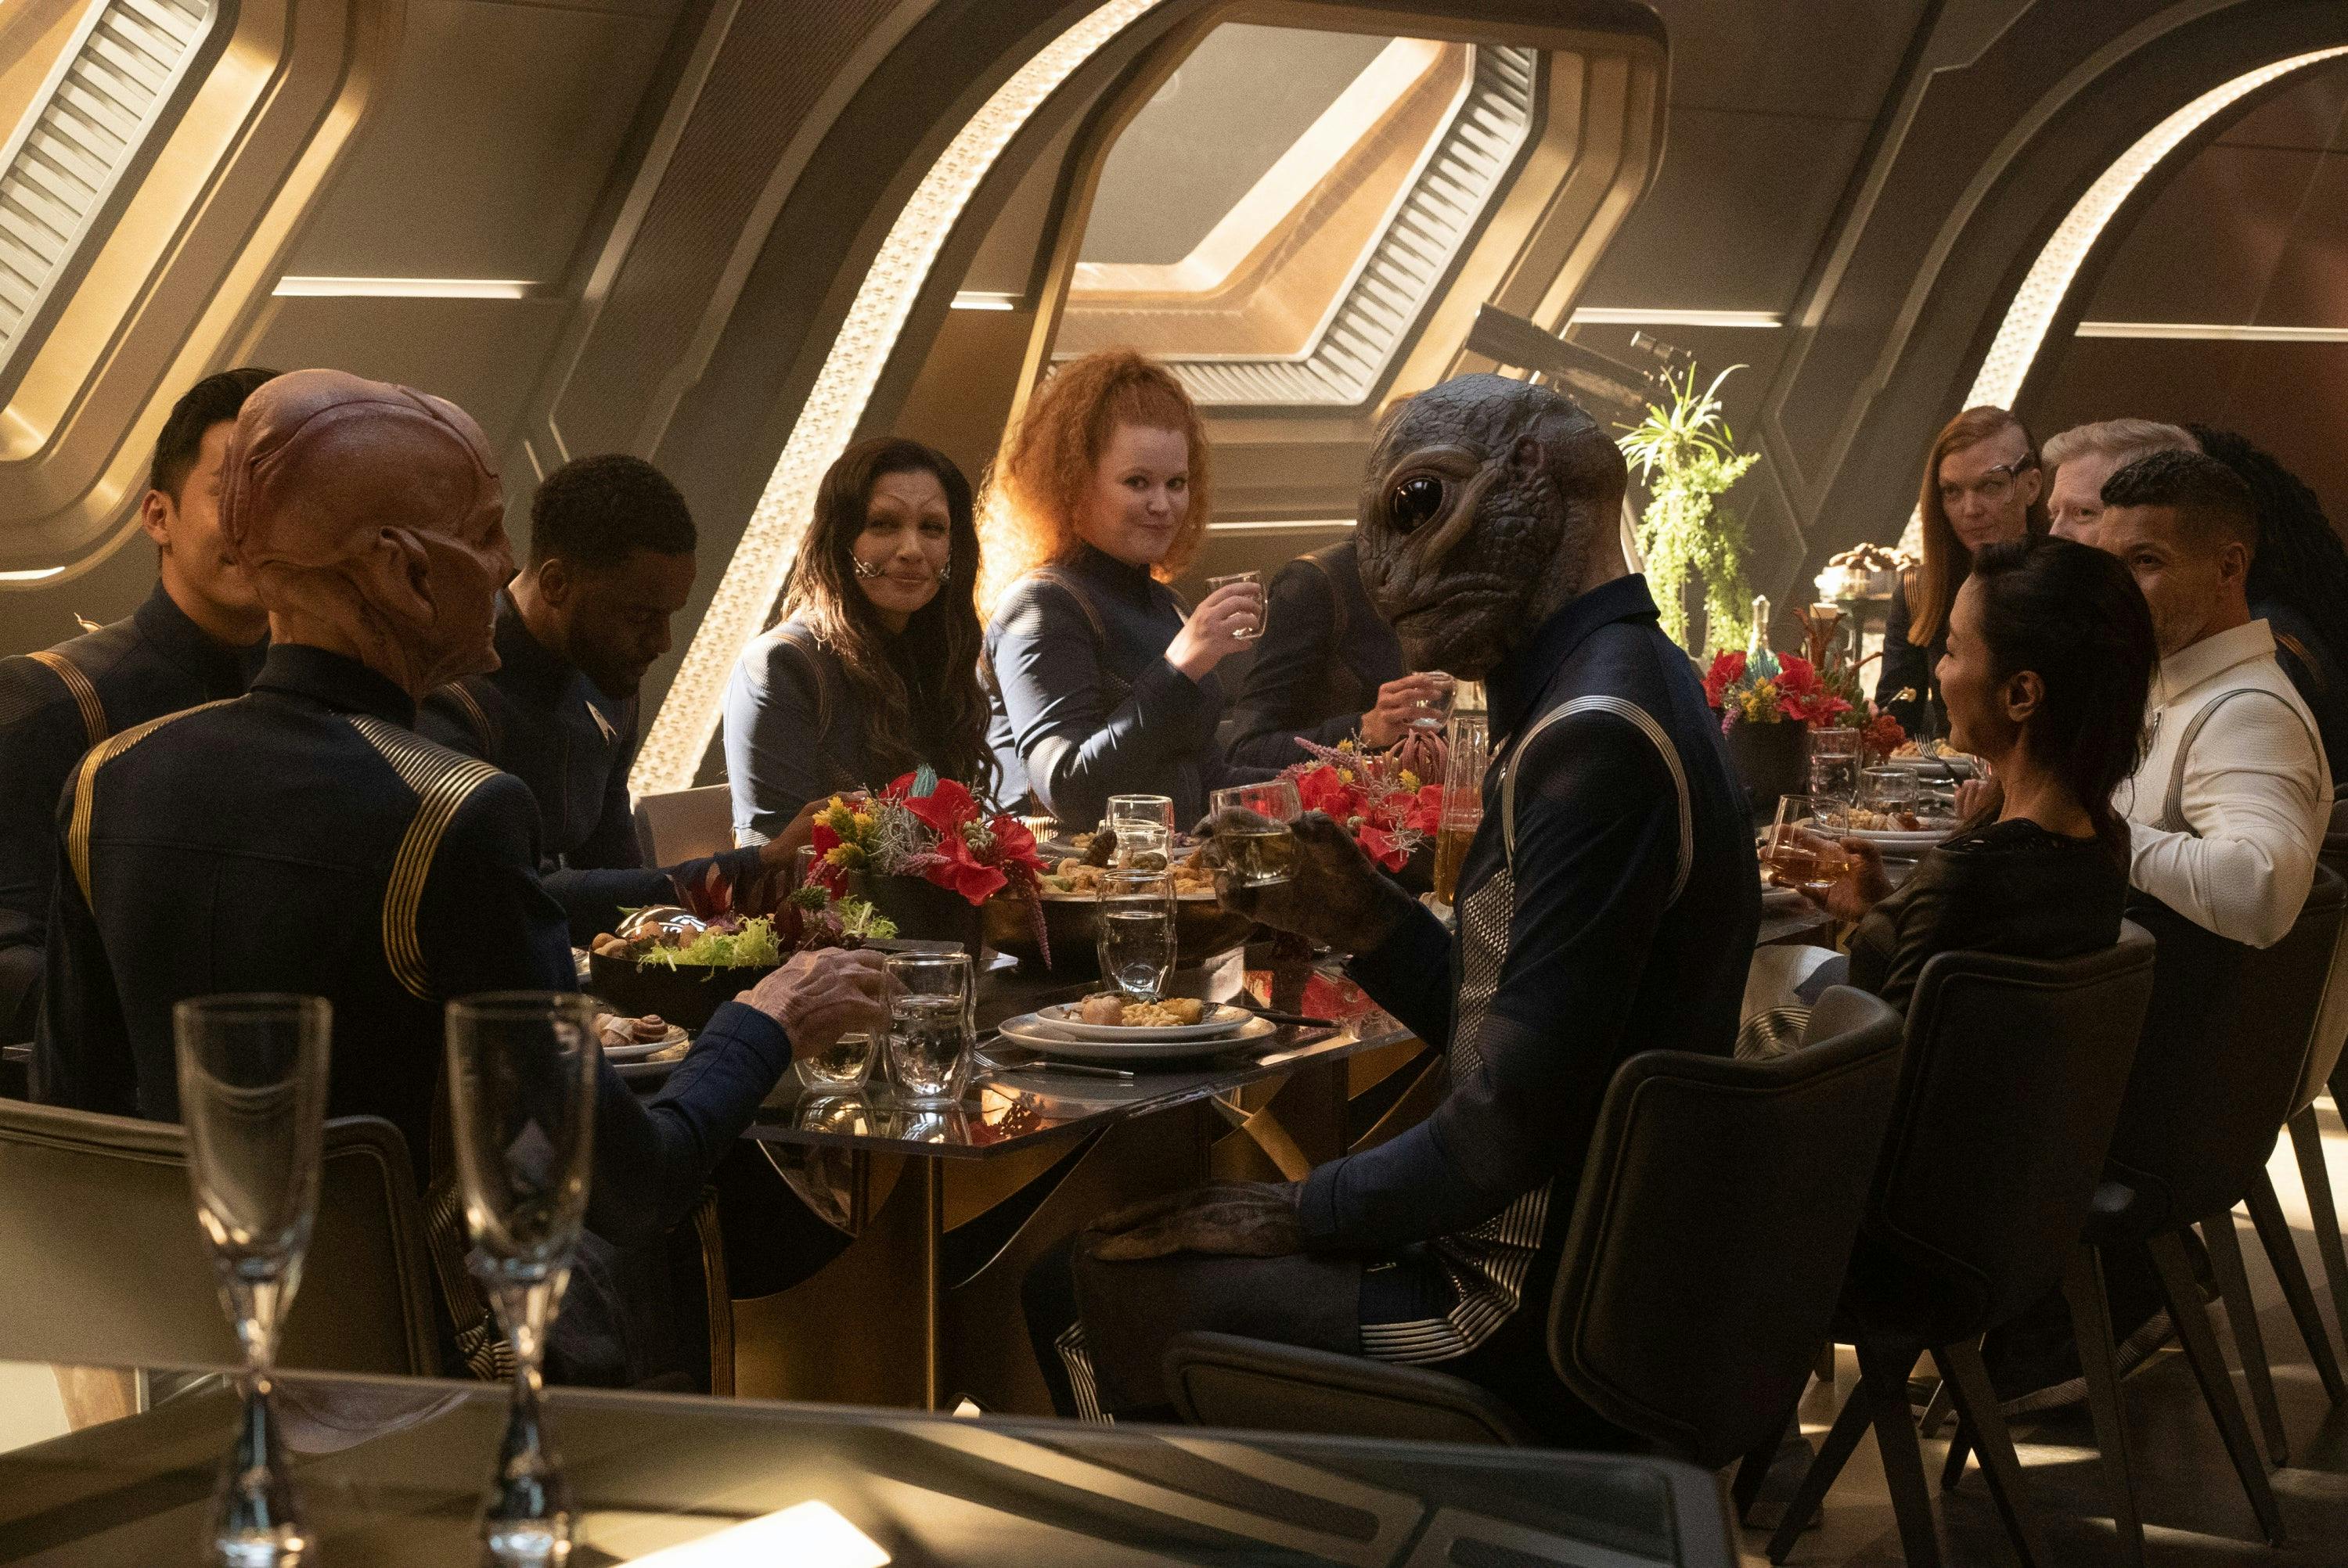 Saru hosts a dinner with the entire crew on Star Trek: Discovery